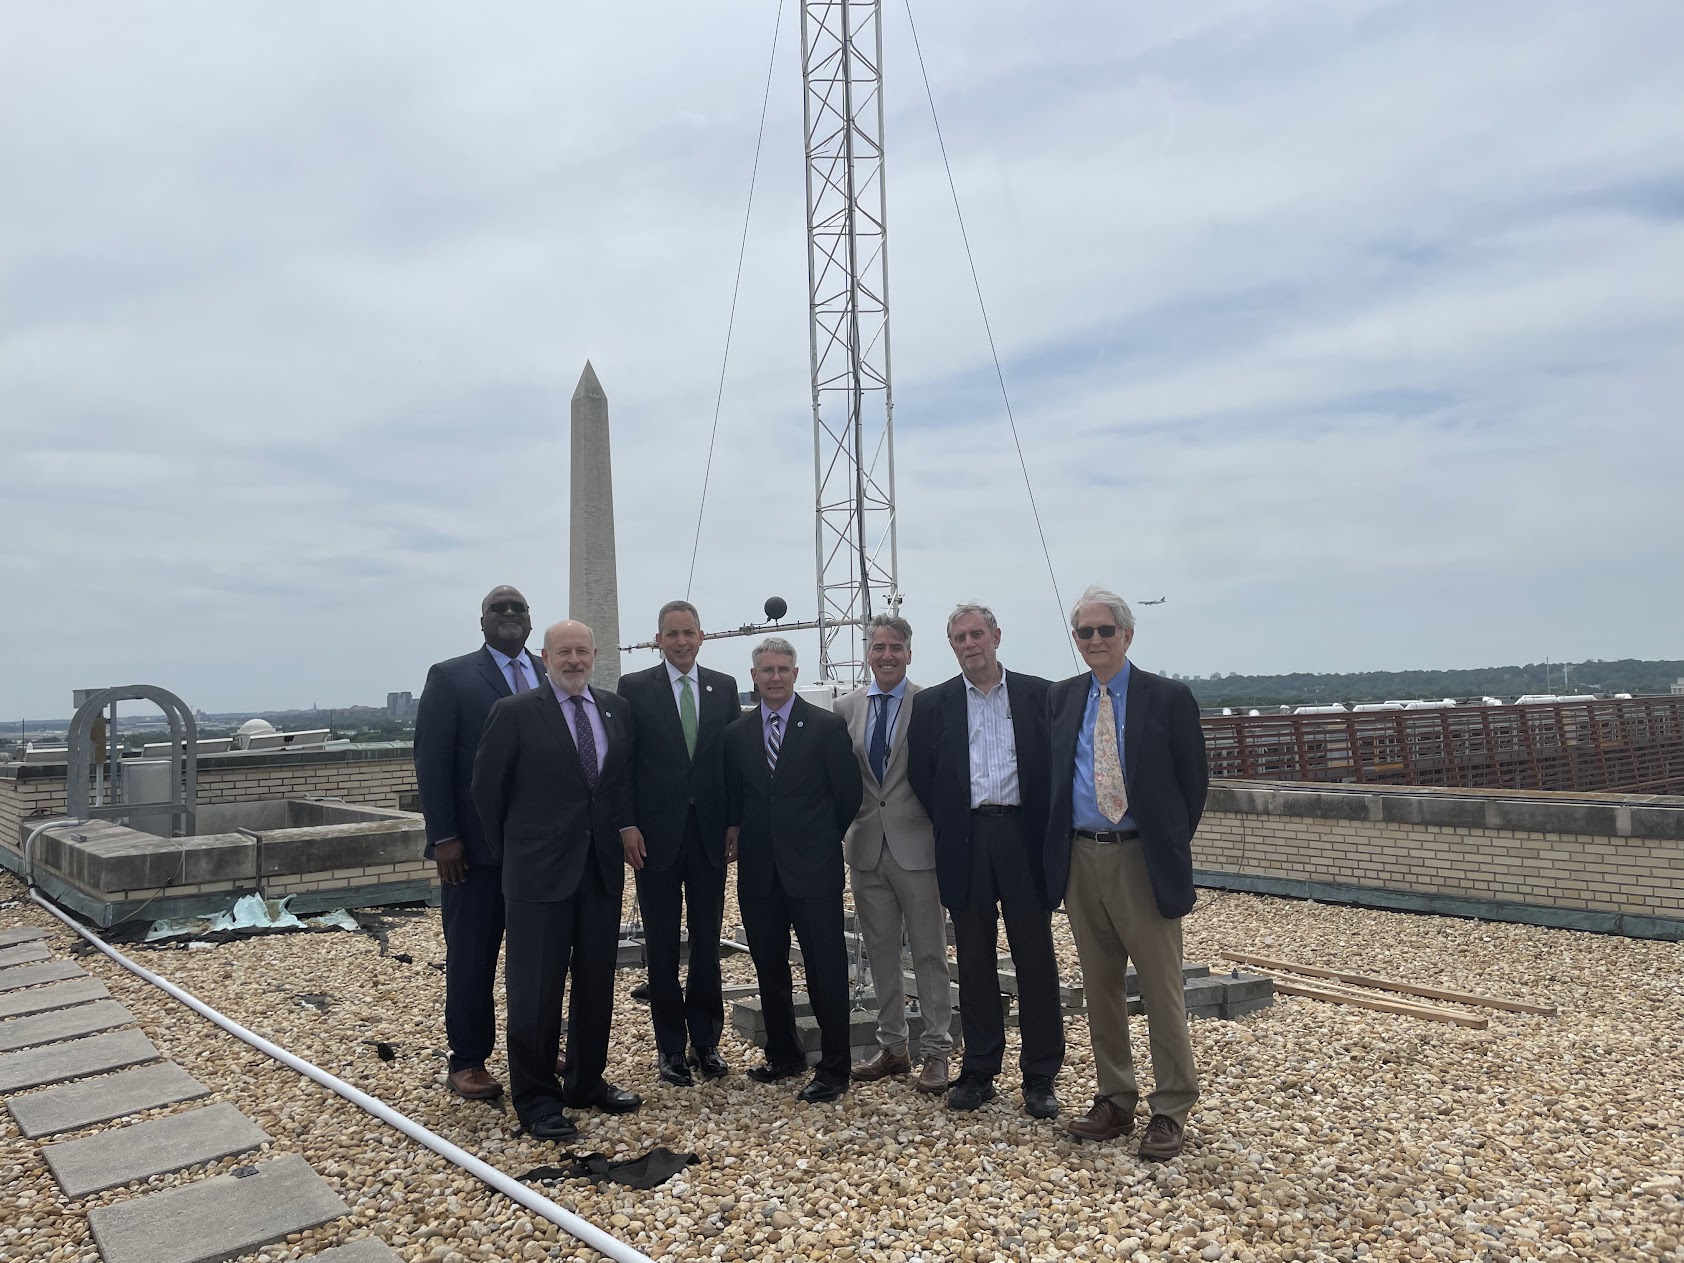 Group of 7 men in suits standing on a flat rooftop with a metal frame tower on the roof behind them and the Washington Monument in the background.